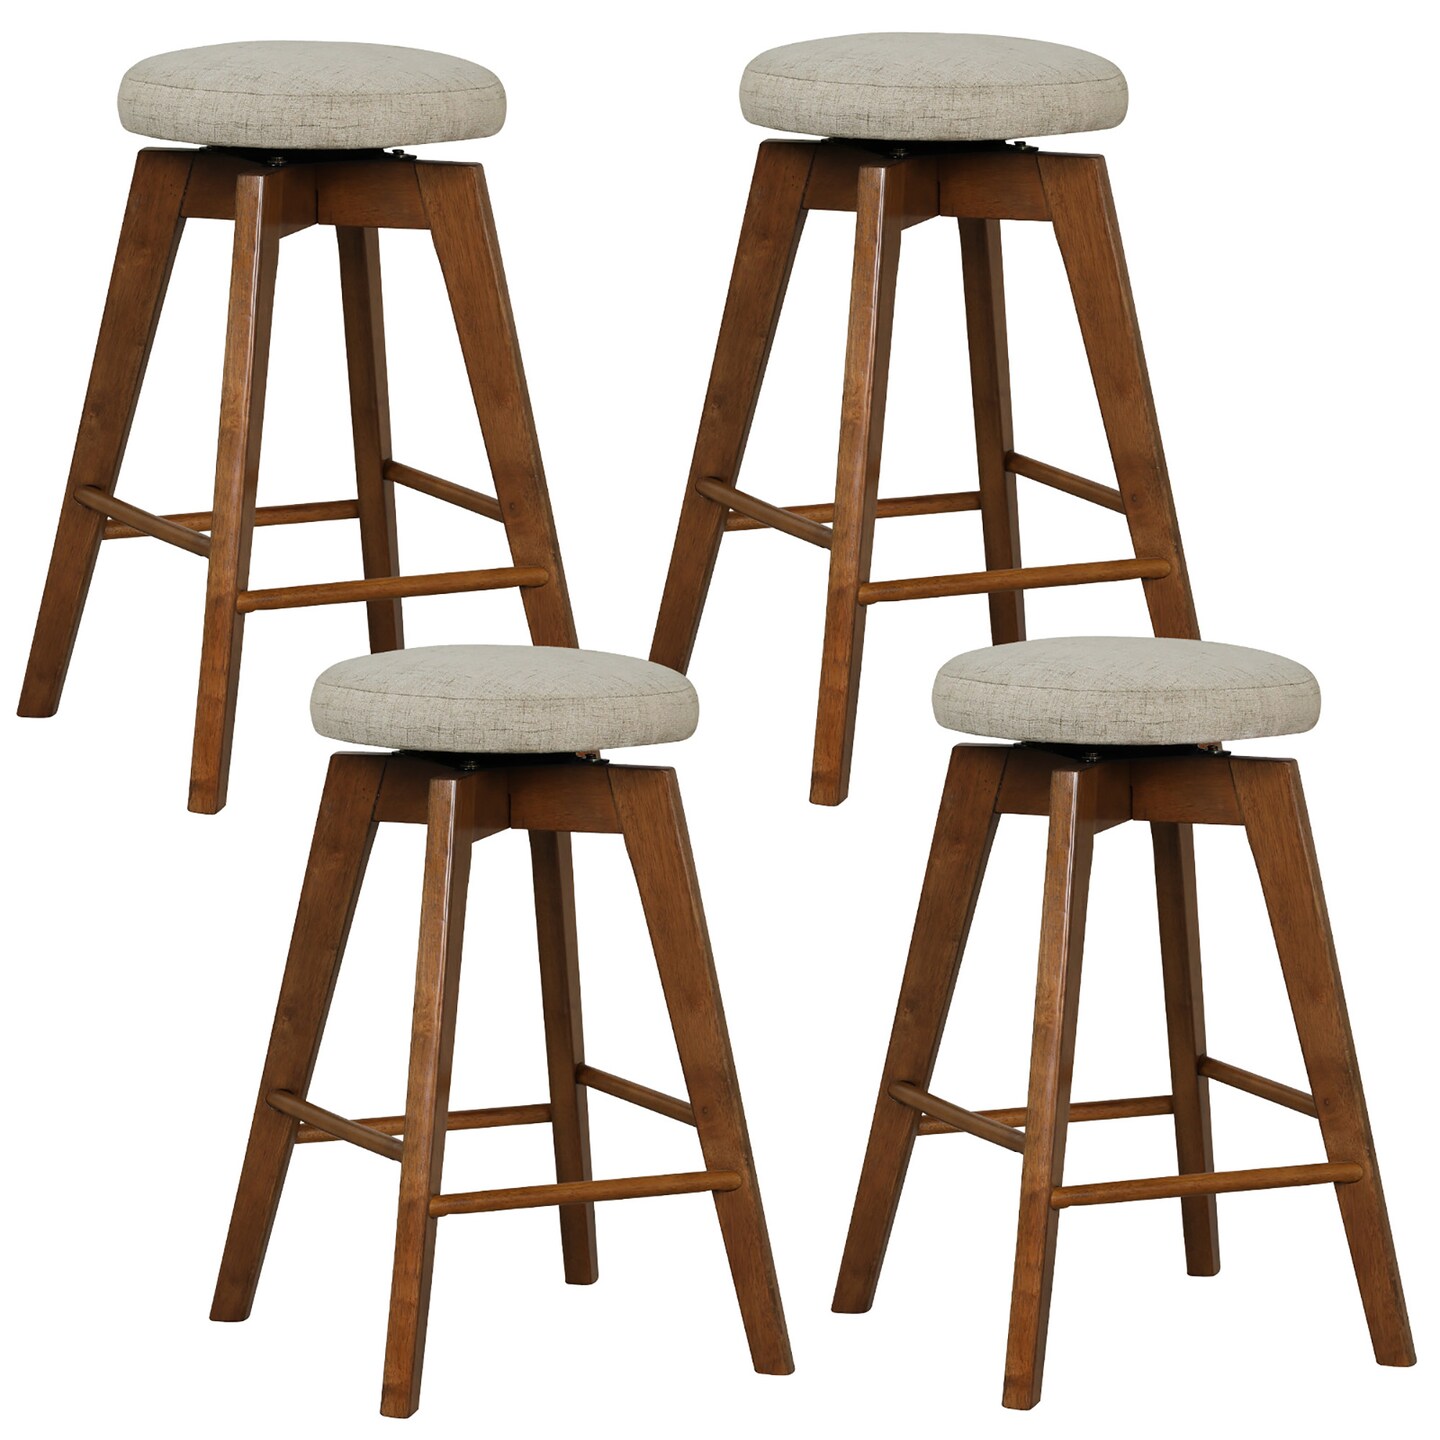 Costway Set of 2 Swivel Bar Stools Upholstered Counter Height Chairs with Rubber Wood Legs